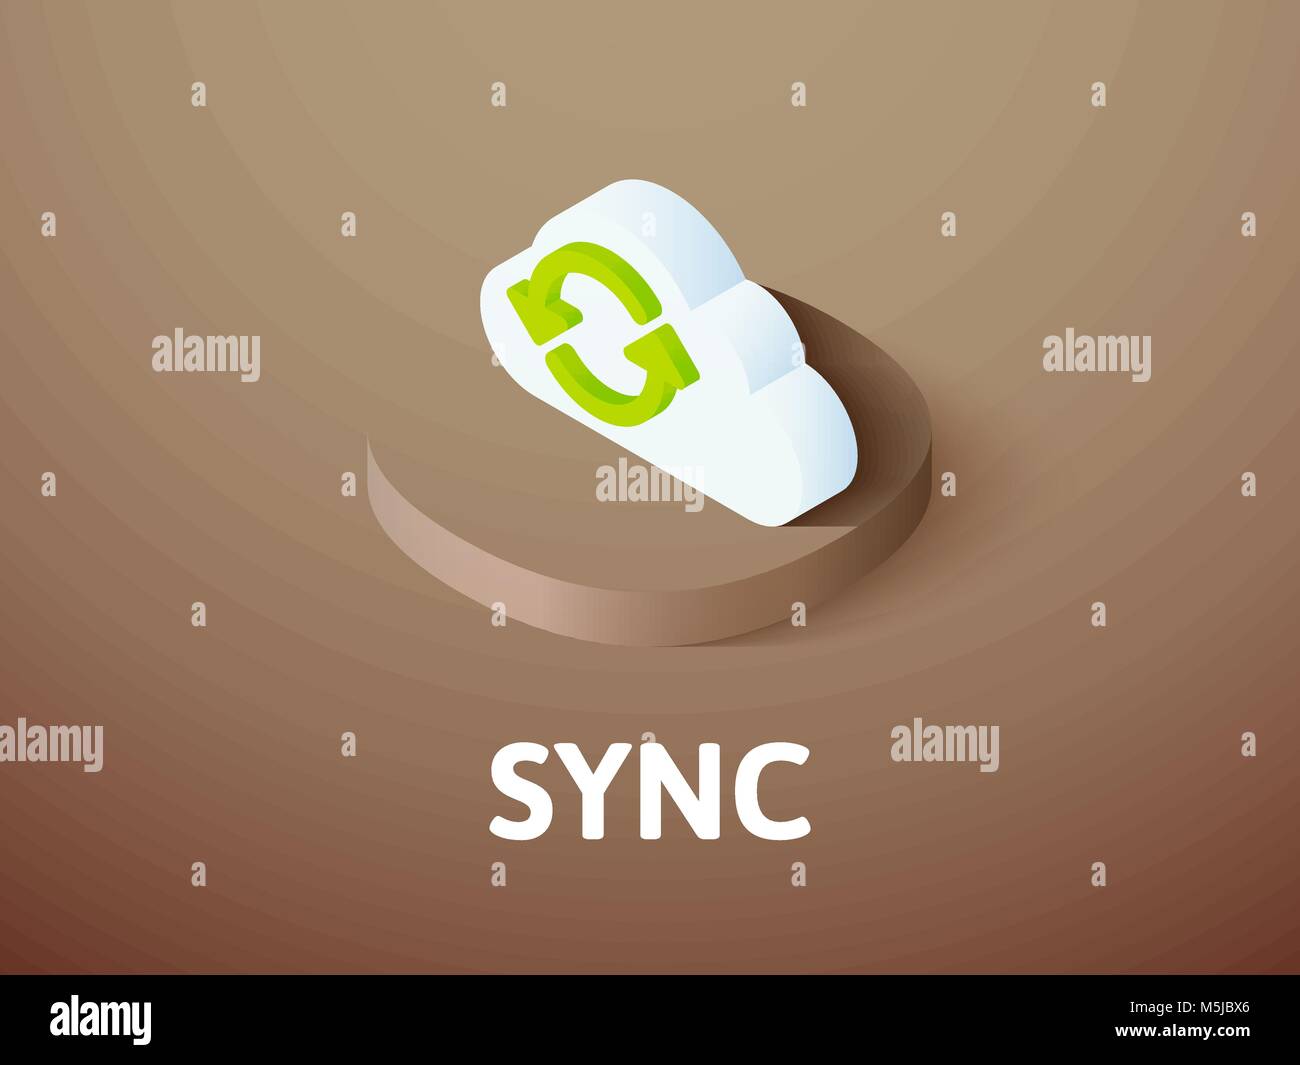 Sync isometric icon, isolated on color background Stock Vector